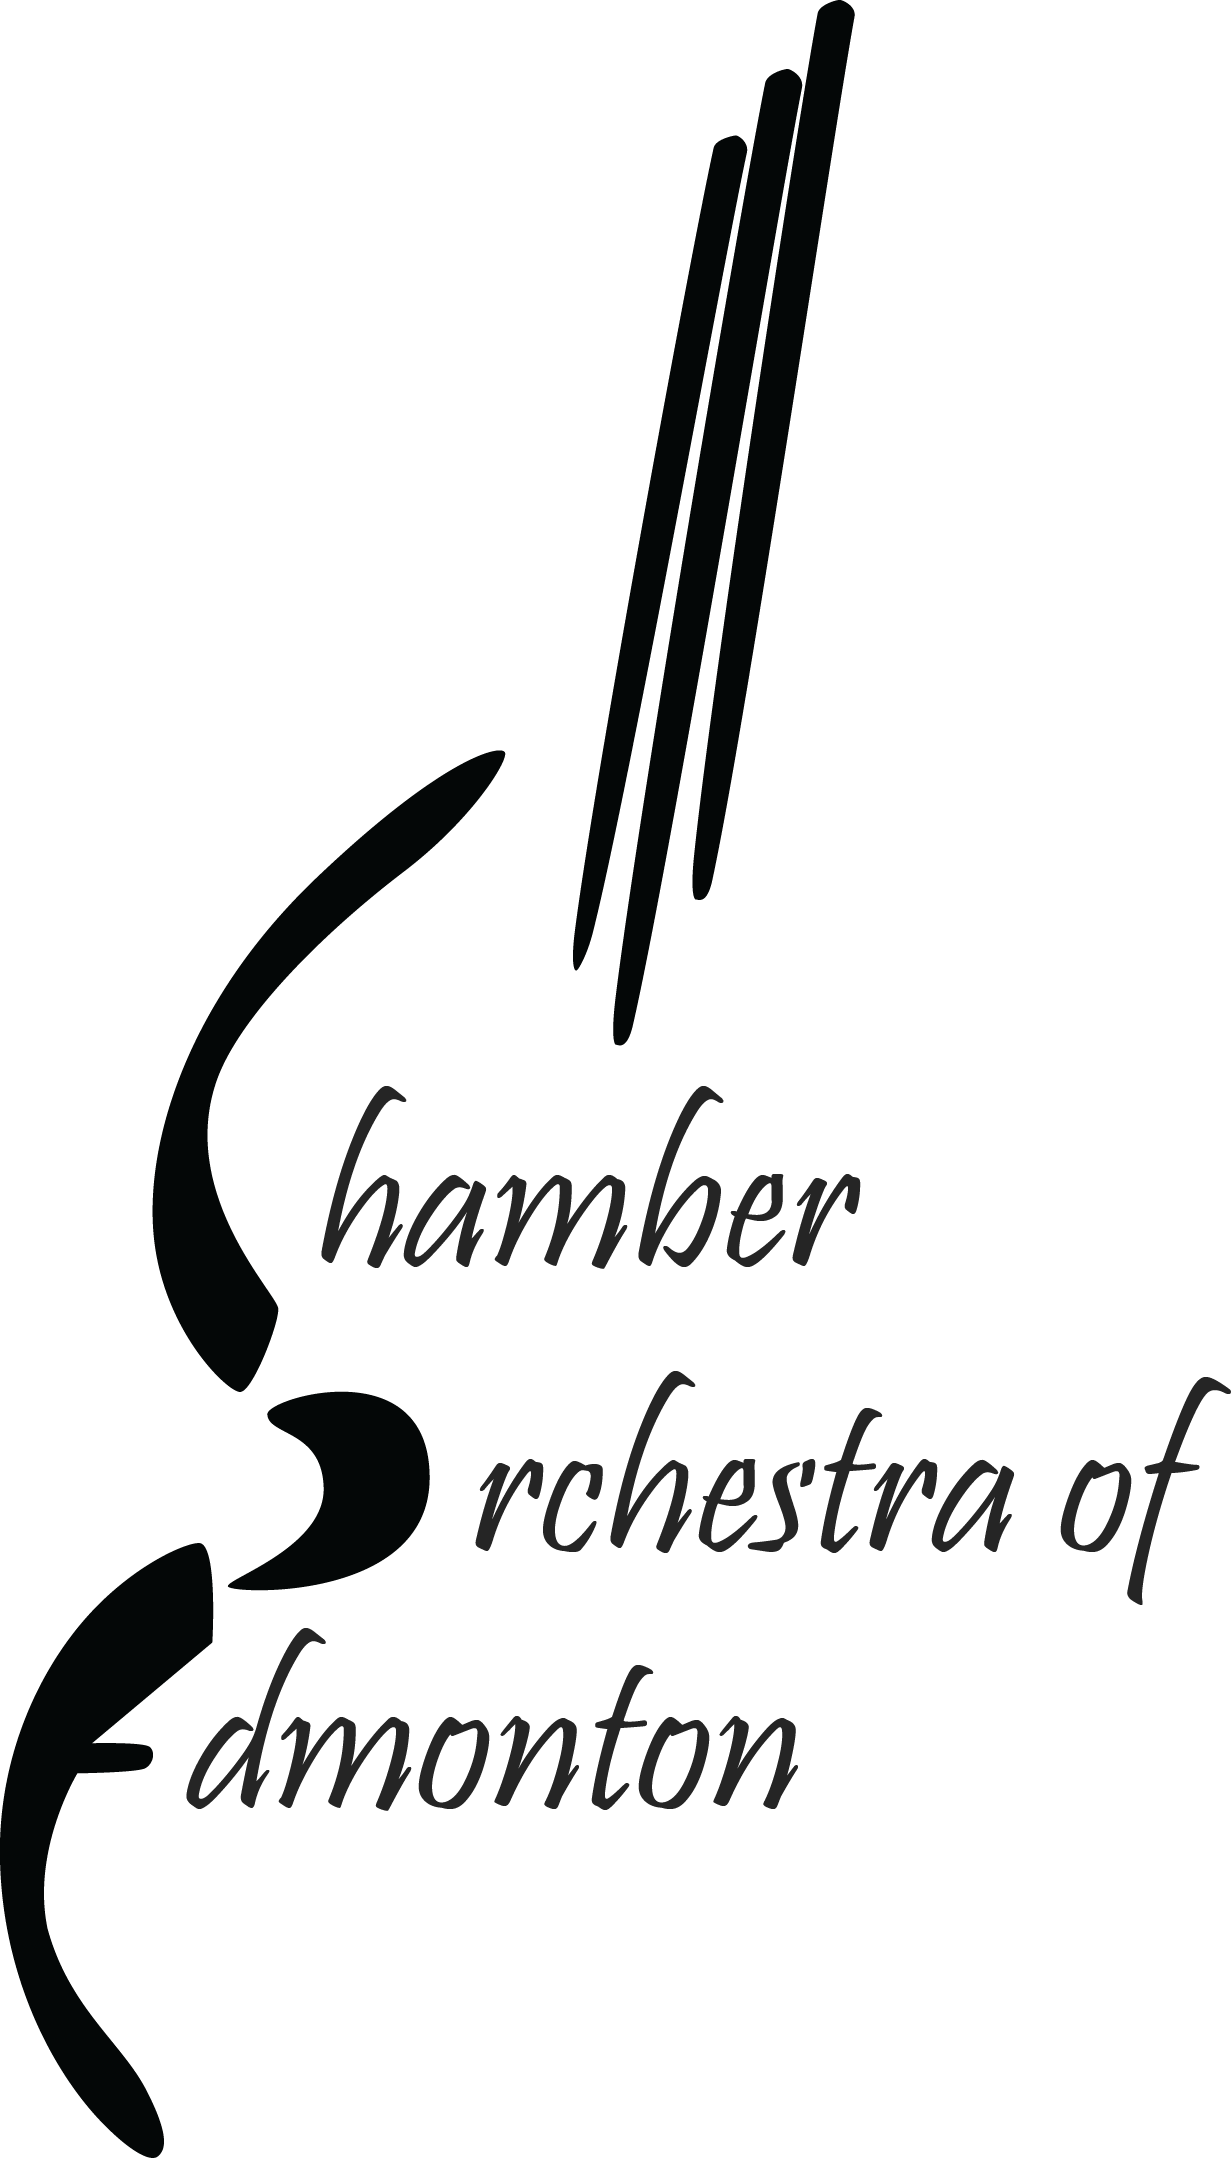 Image result for chamber orchestra of Edmonton